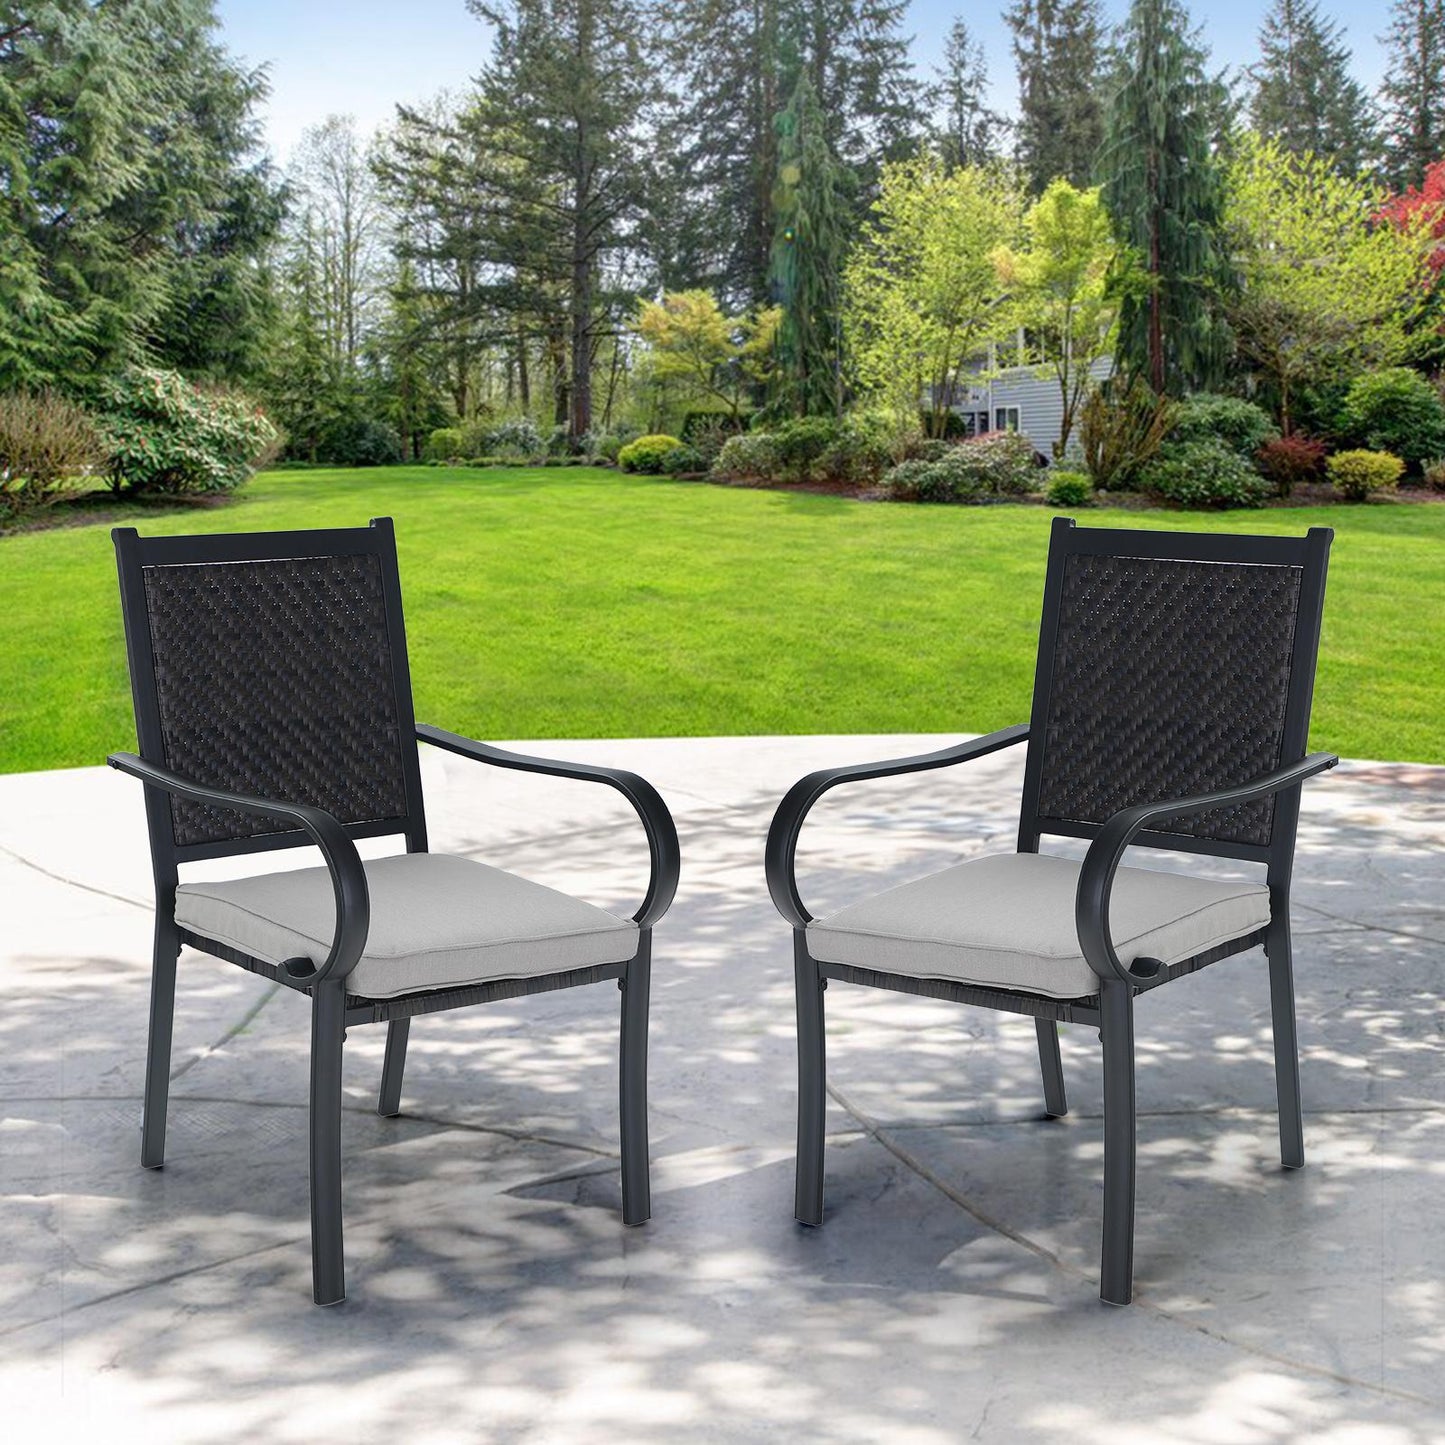 Sophia & William Patio Rattan Dining Chairs Set of 2 with Cushions, Dark Brown